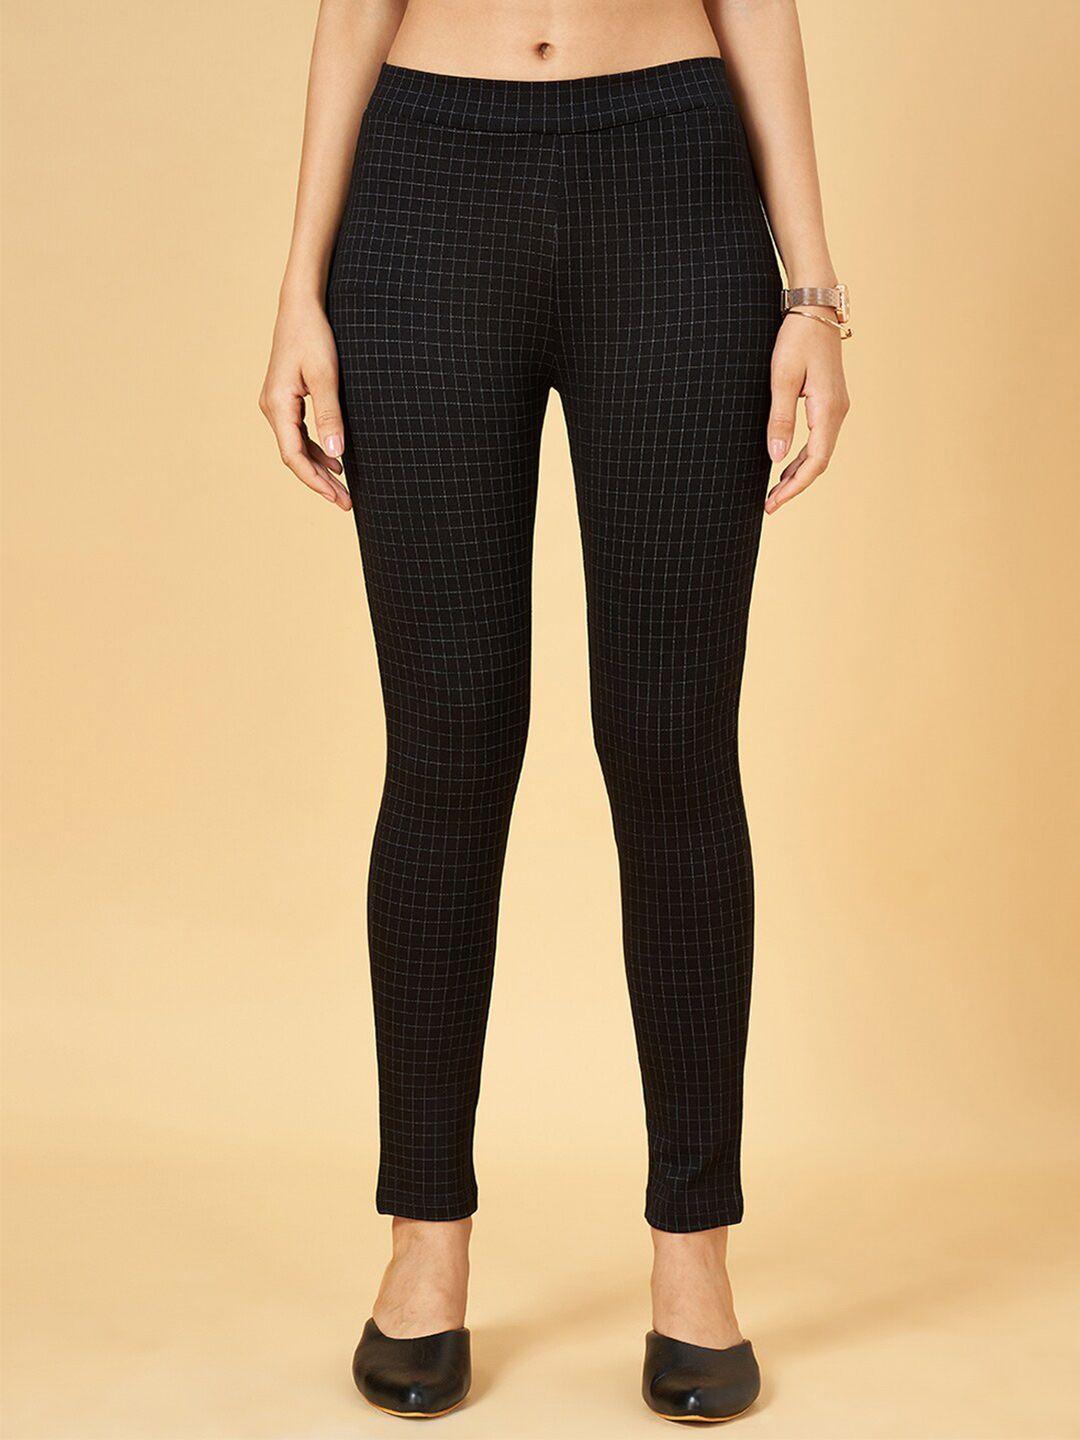 annabelle-by-pantaloons-women-skinny-fit-checked-treggings